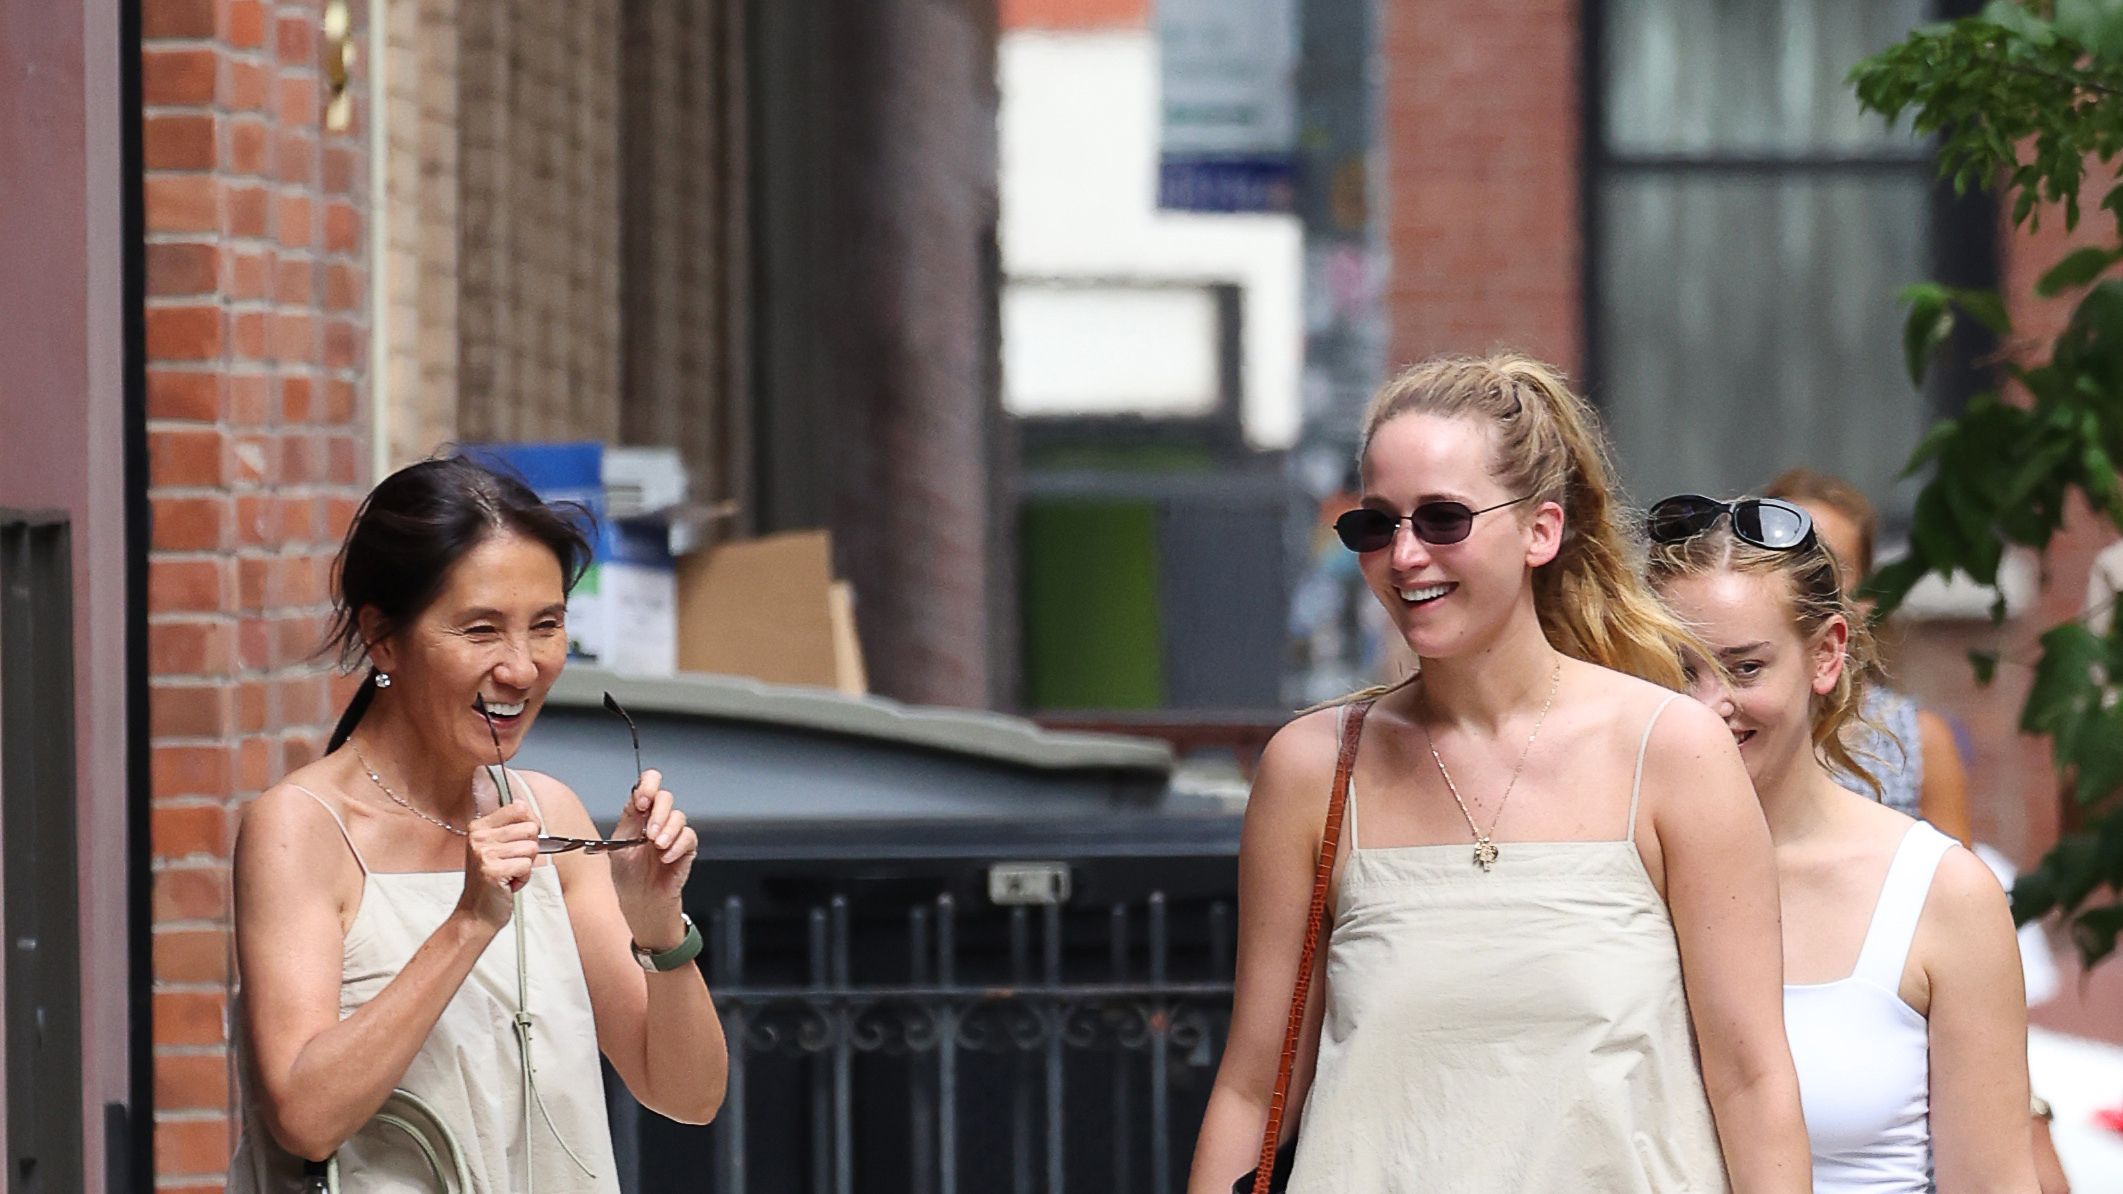 Jennifer Lawrence Does Date Night in a Beige Co-ord and Her